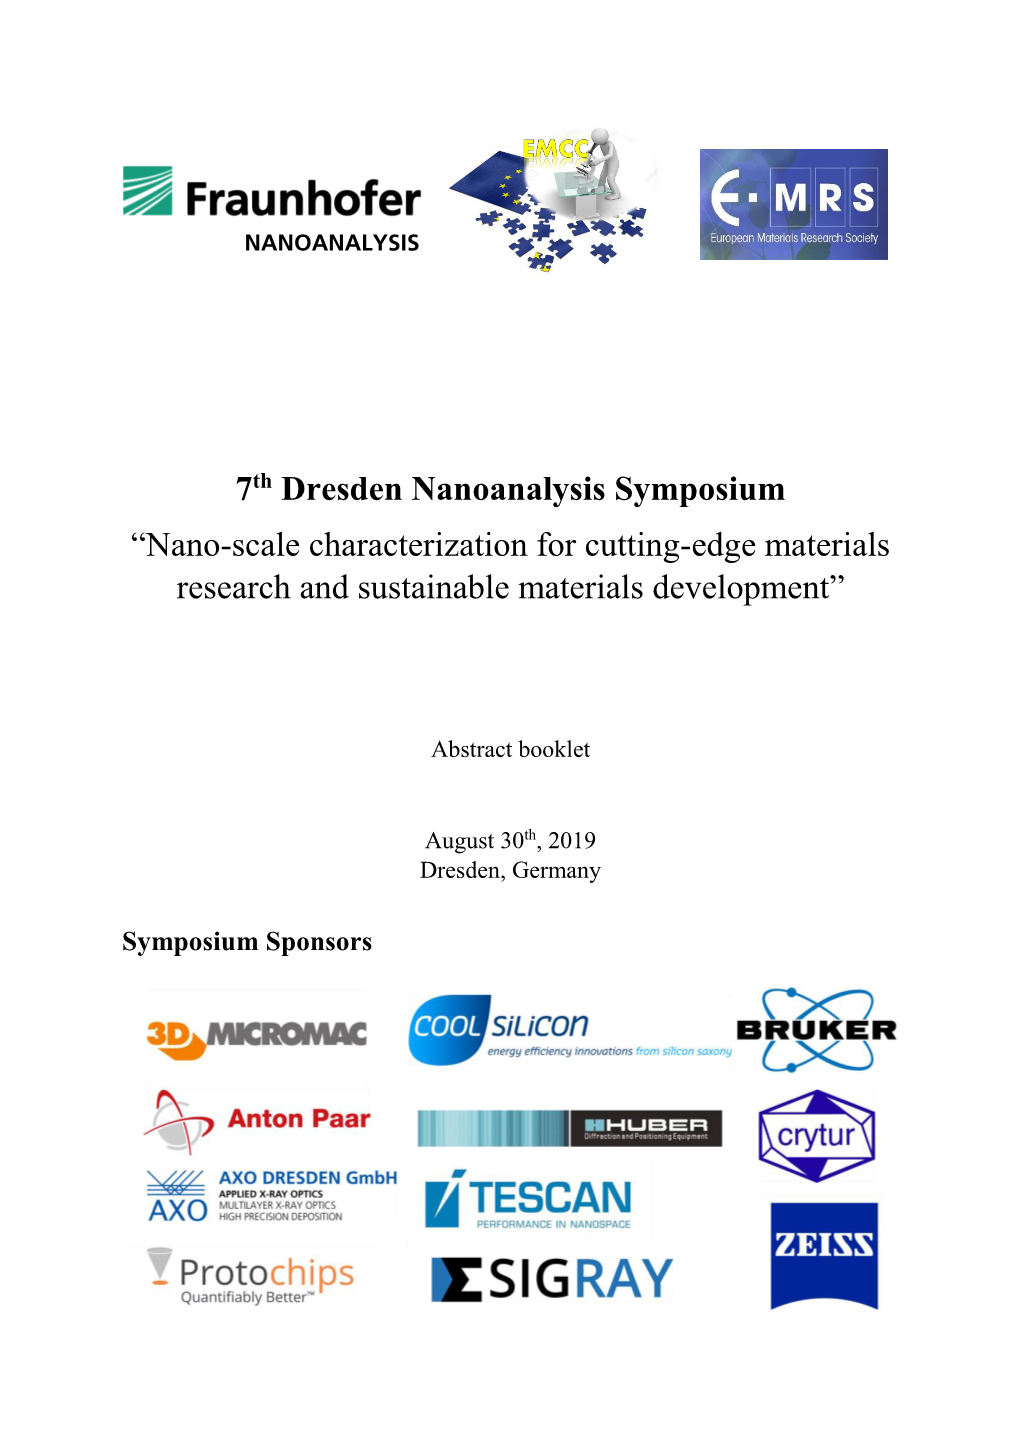 7Th Dresden Nanoanalysis Symposium “Nano-Scale Characterization for Cutting-Edge Materials Research and Sustainable Materials Development”